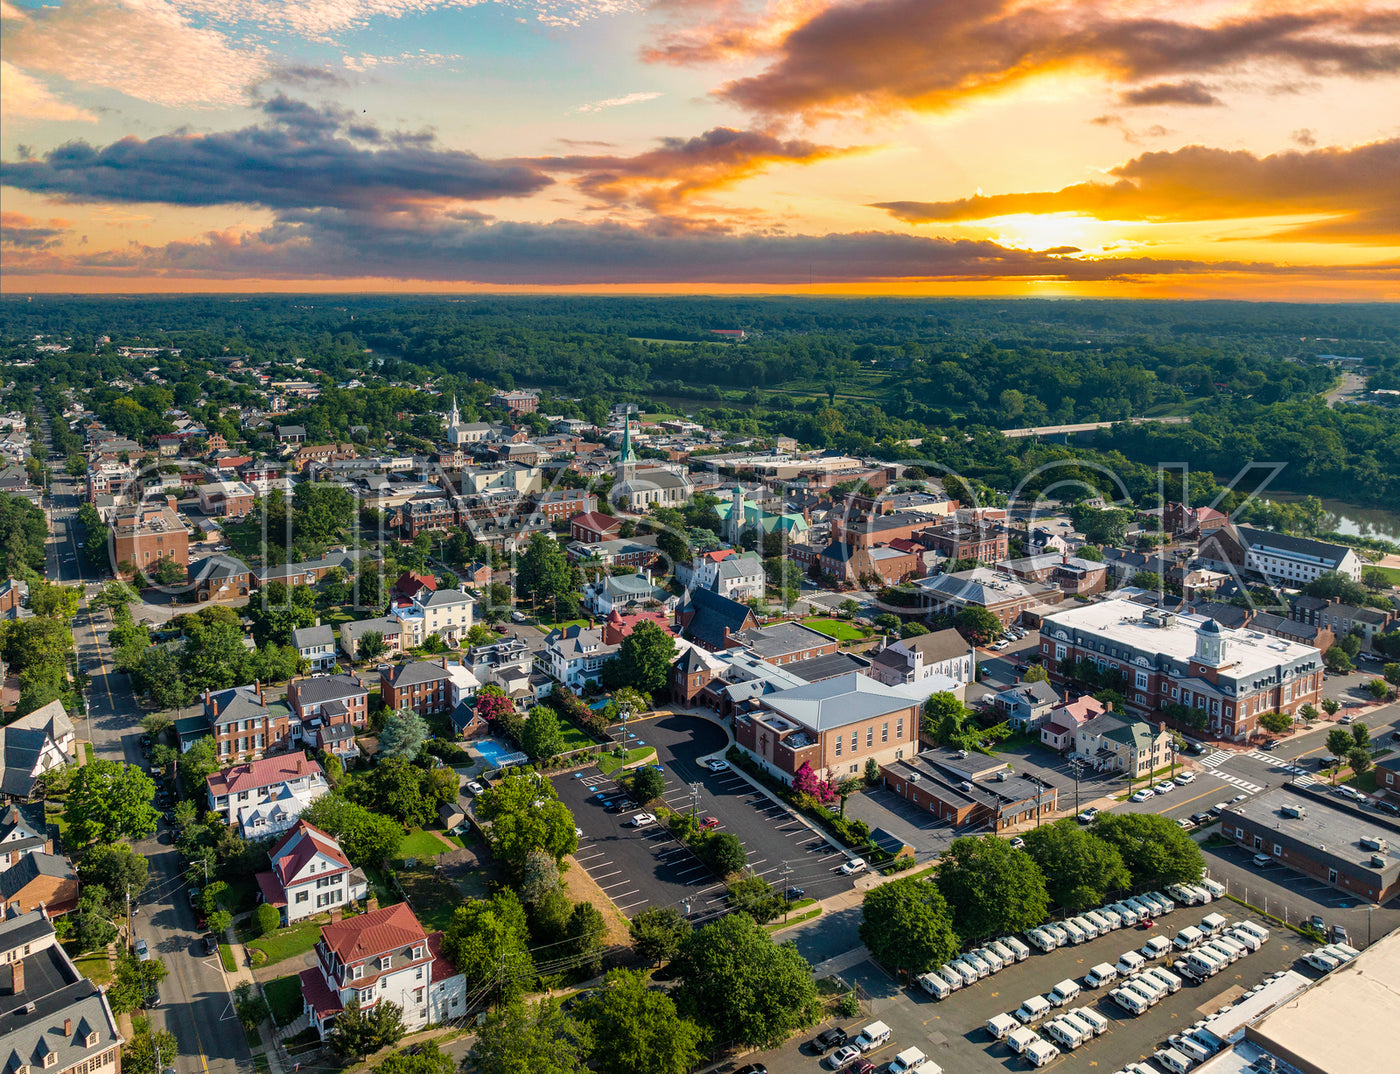 Aerial view of Fredericksburg, VA at sunset with river view